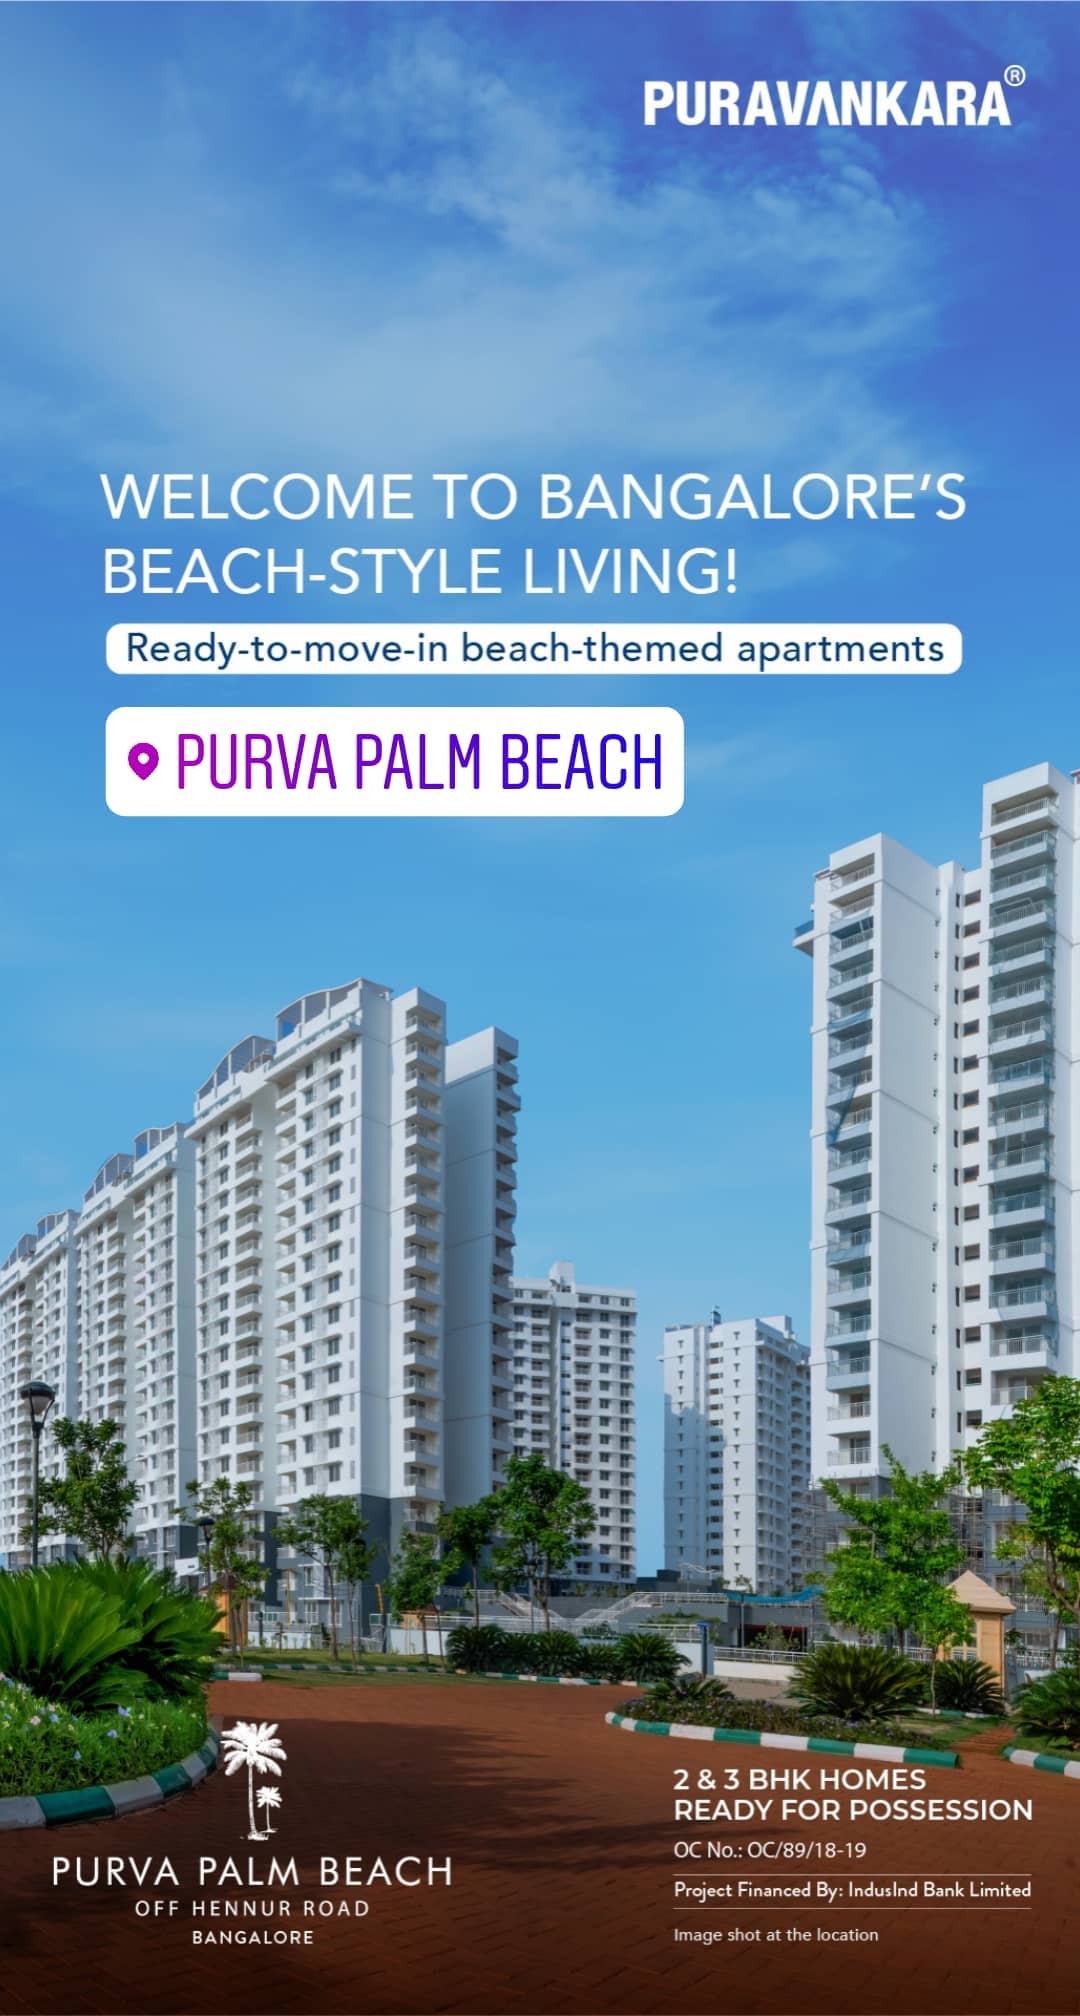 Ready to move in beach themed apartments at Purva Palm Beach, Bangalore